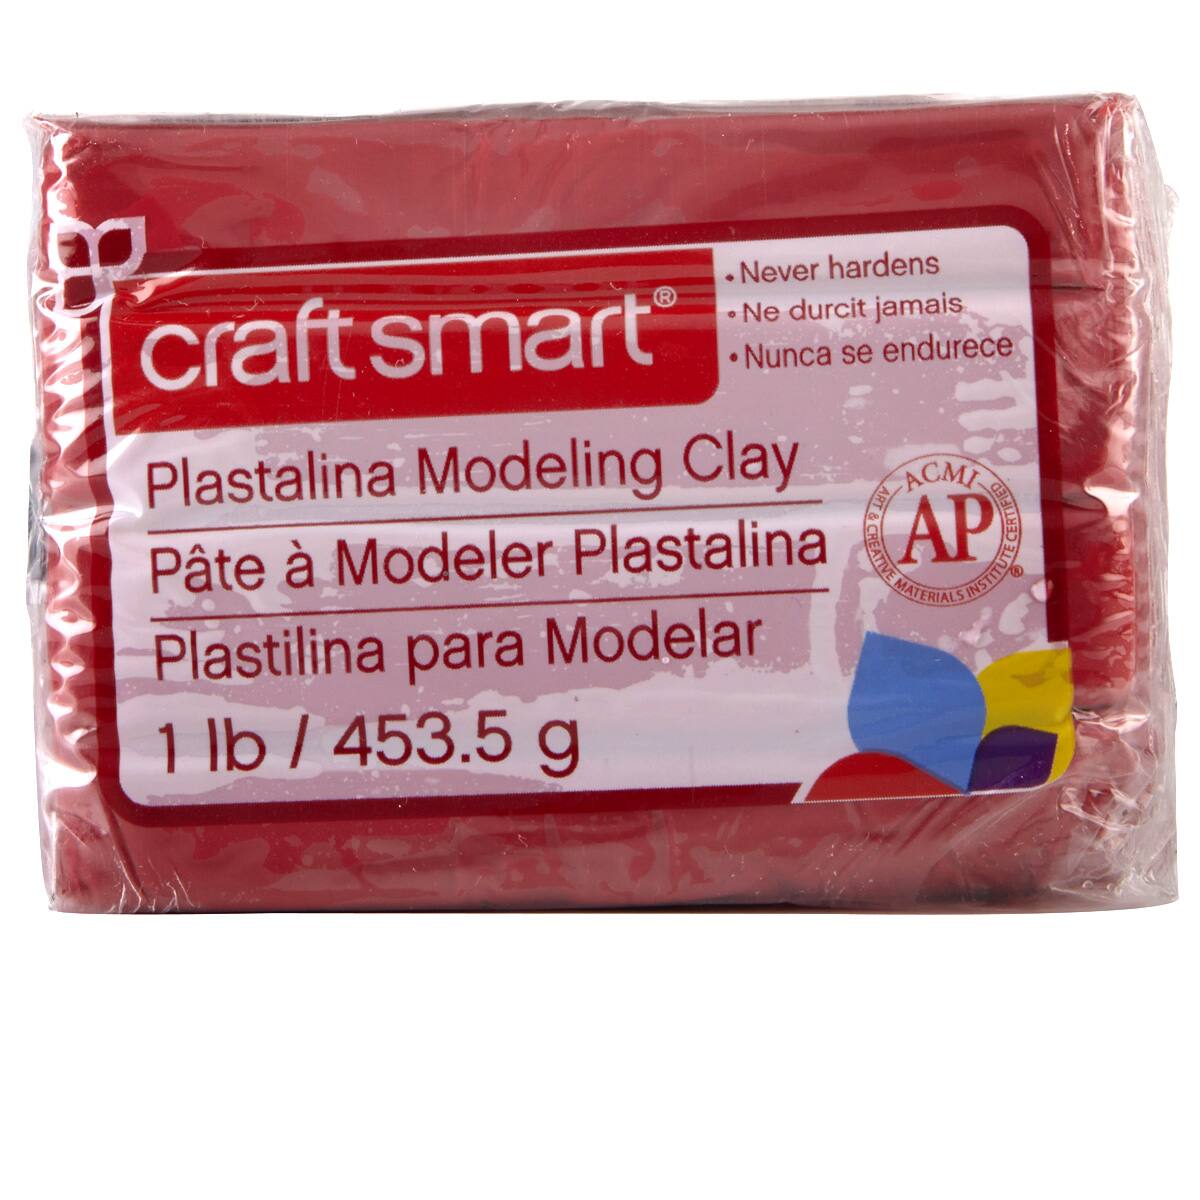 Plastalina Modeling Clay by Craft Smart®